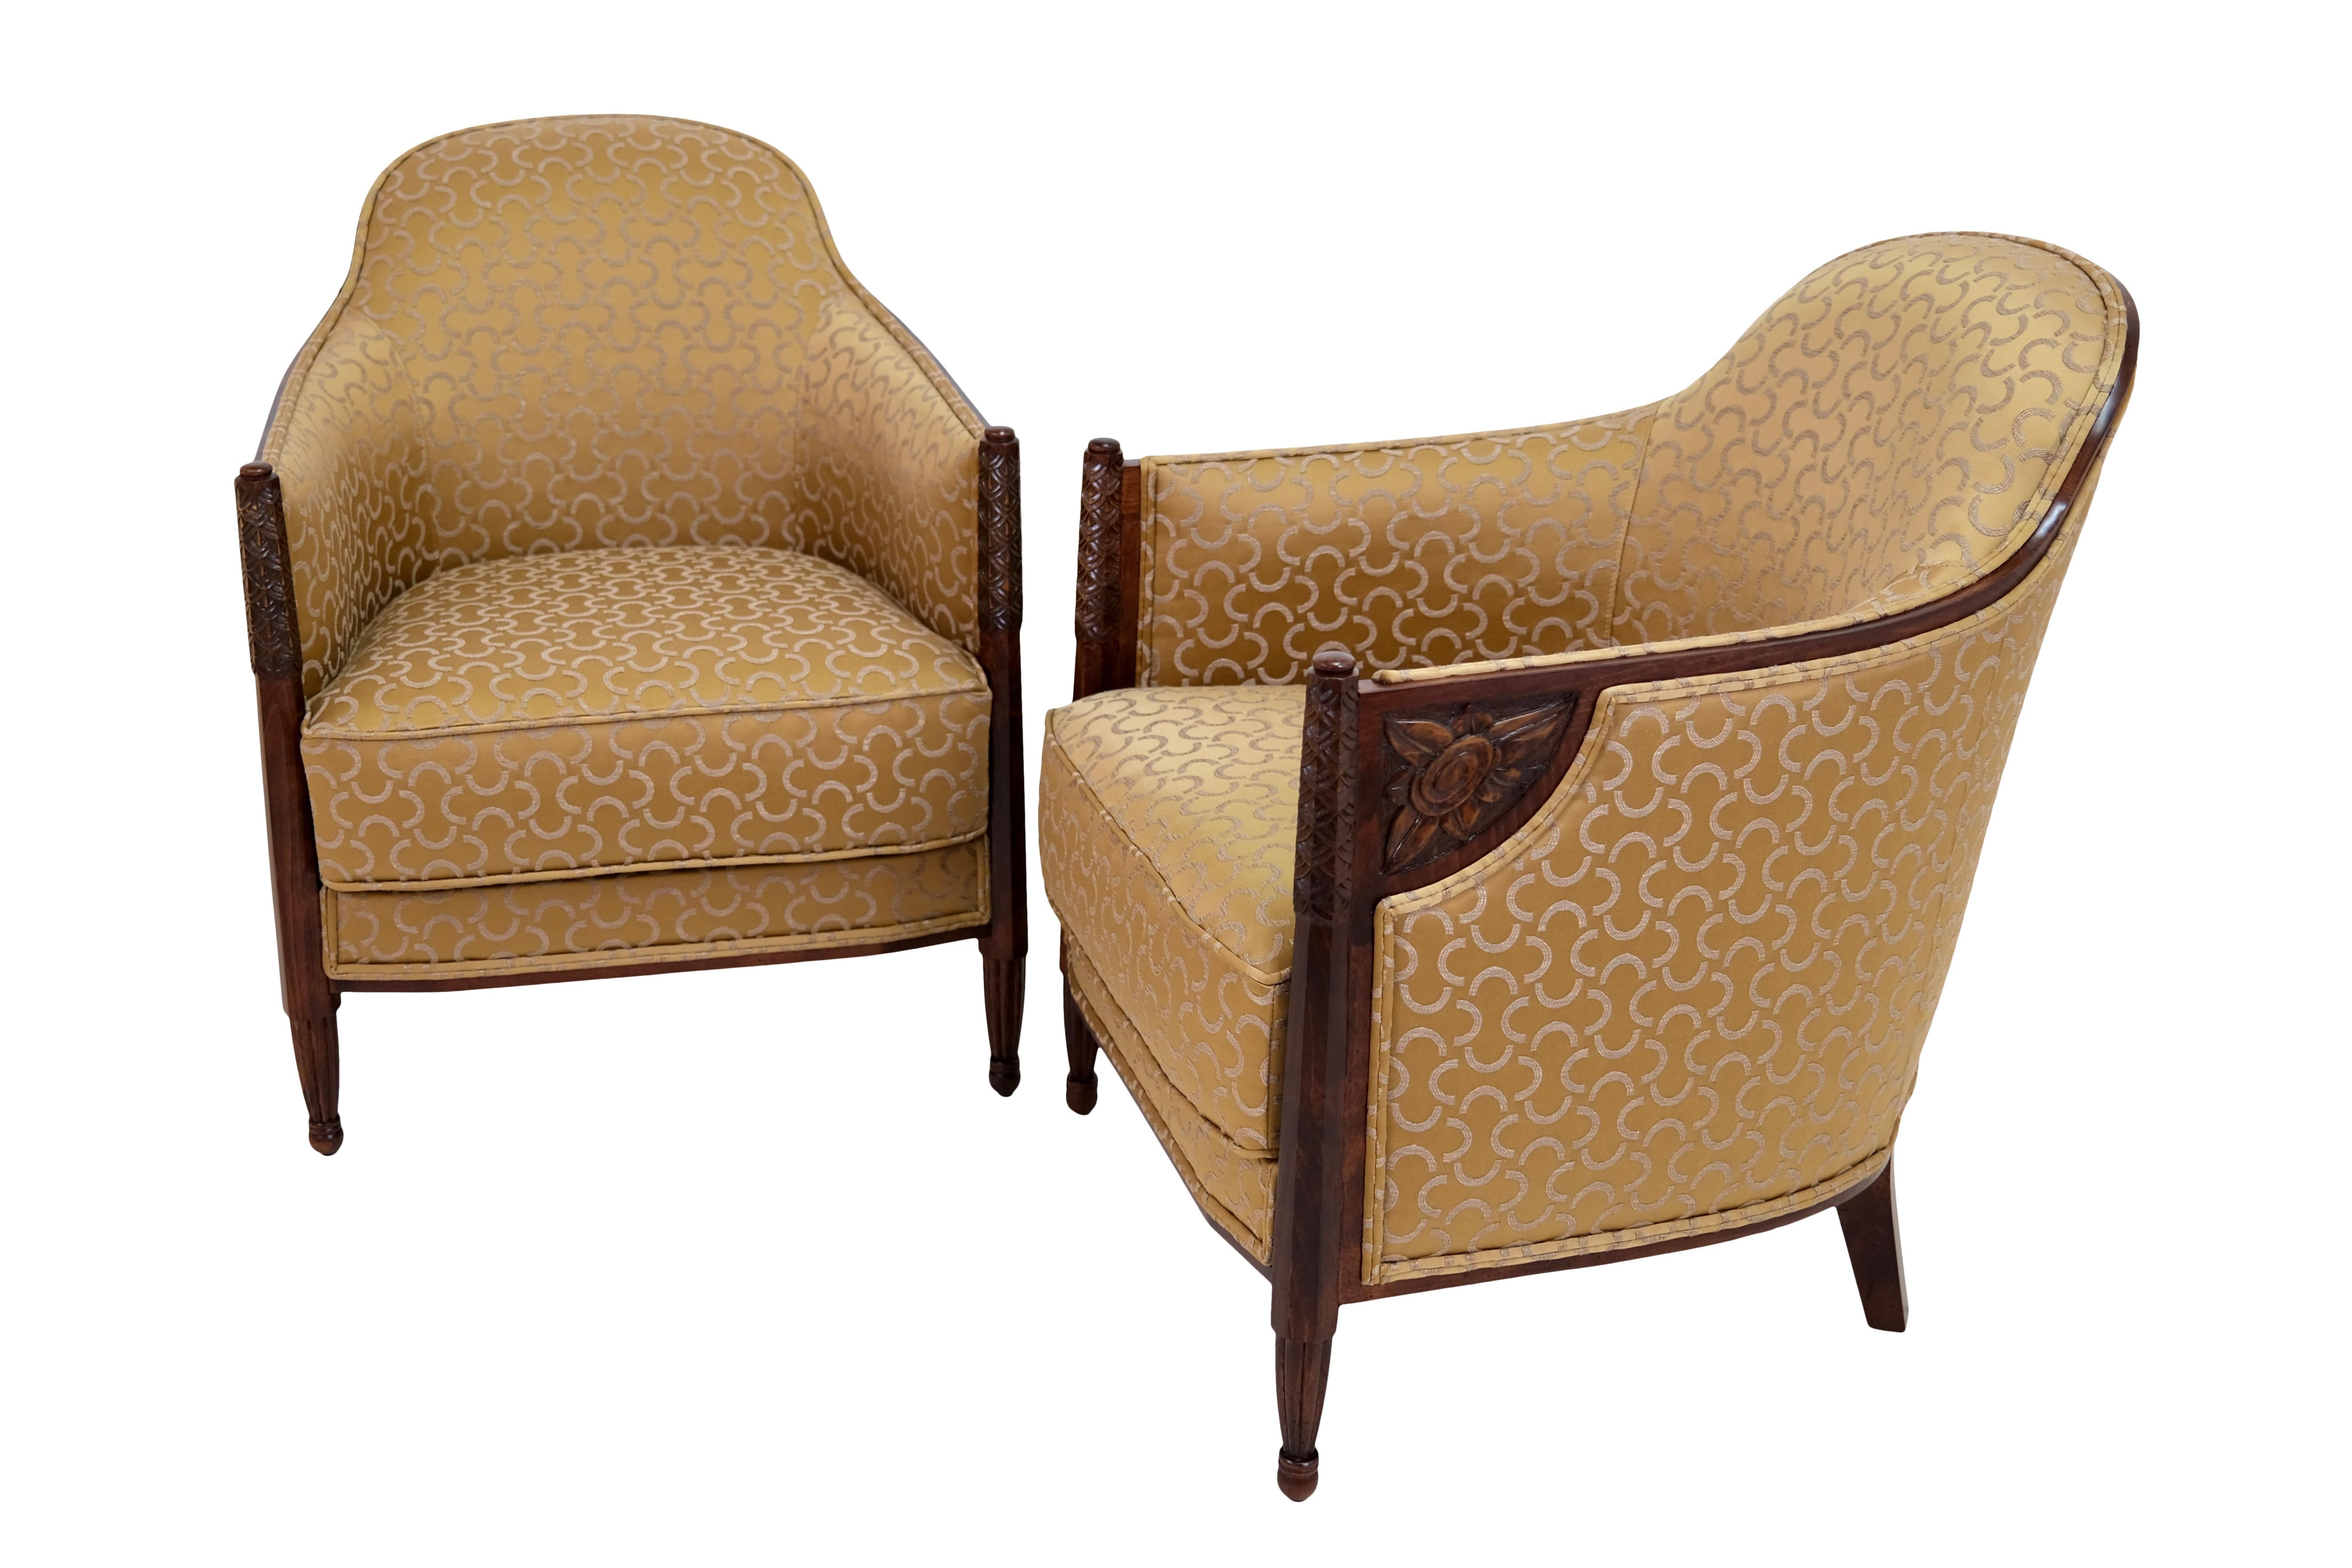 Pair of armchairs
Mahogany 
Carvings with floral and geometric ornamentation
Gold colored upholstery 

Early Art Deco, France circa 1925

Dimensions:
Width: 62 cm
Height: 79 cm
Depth: 70 cm
Seat height: 42 cm.